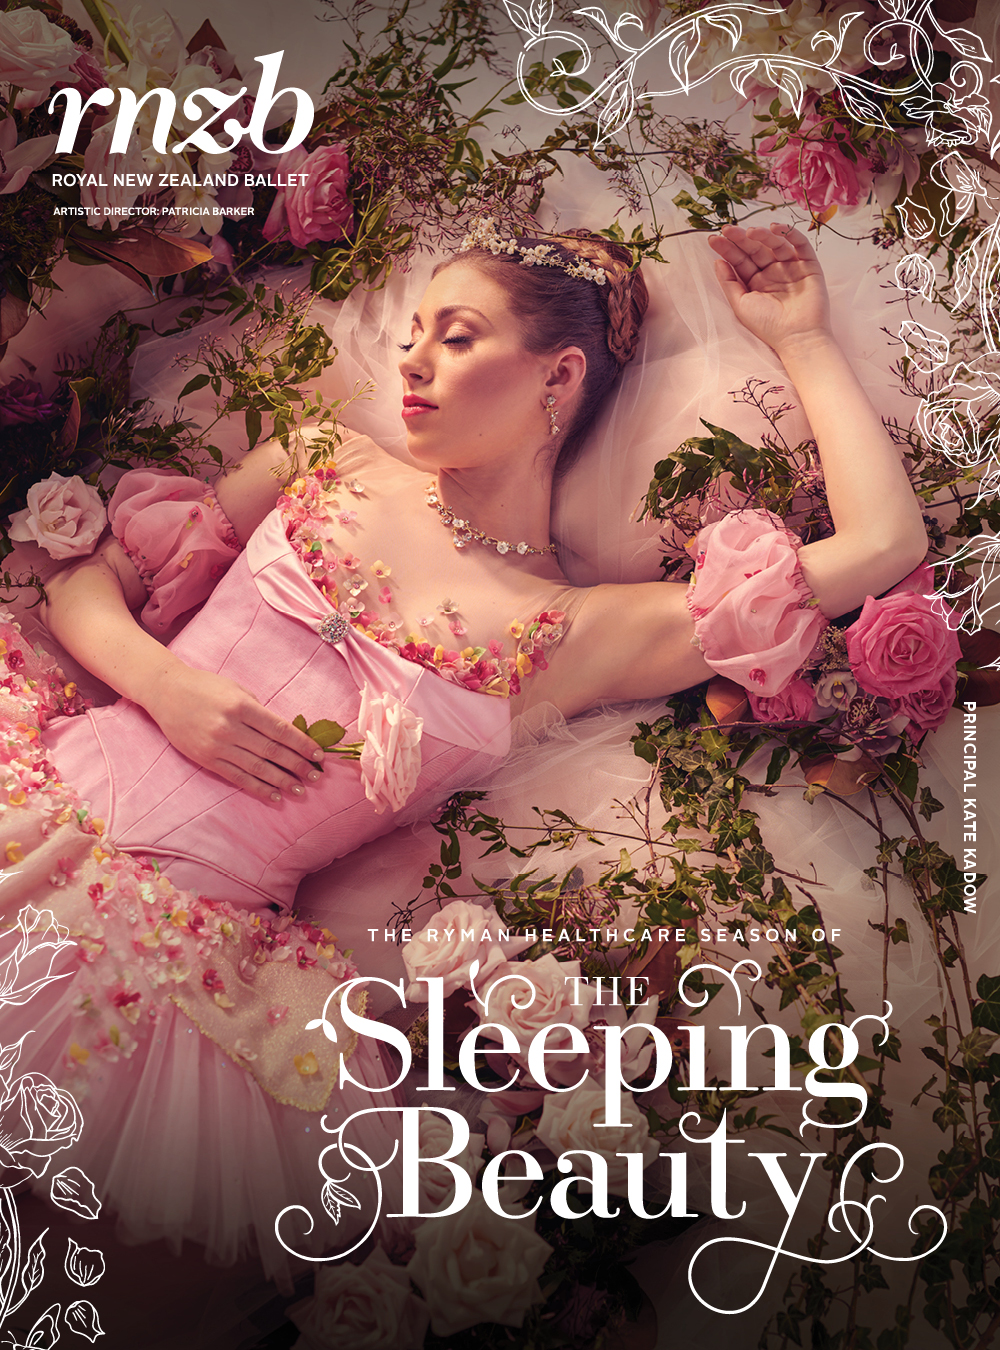 The Sleeping Beauty – Live in Your Living Room (Audio Described Performance)